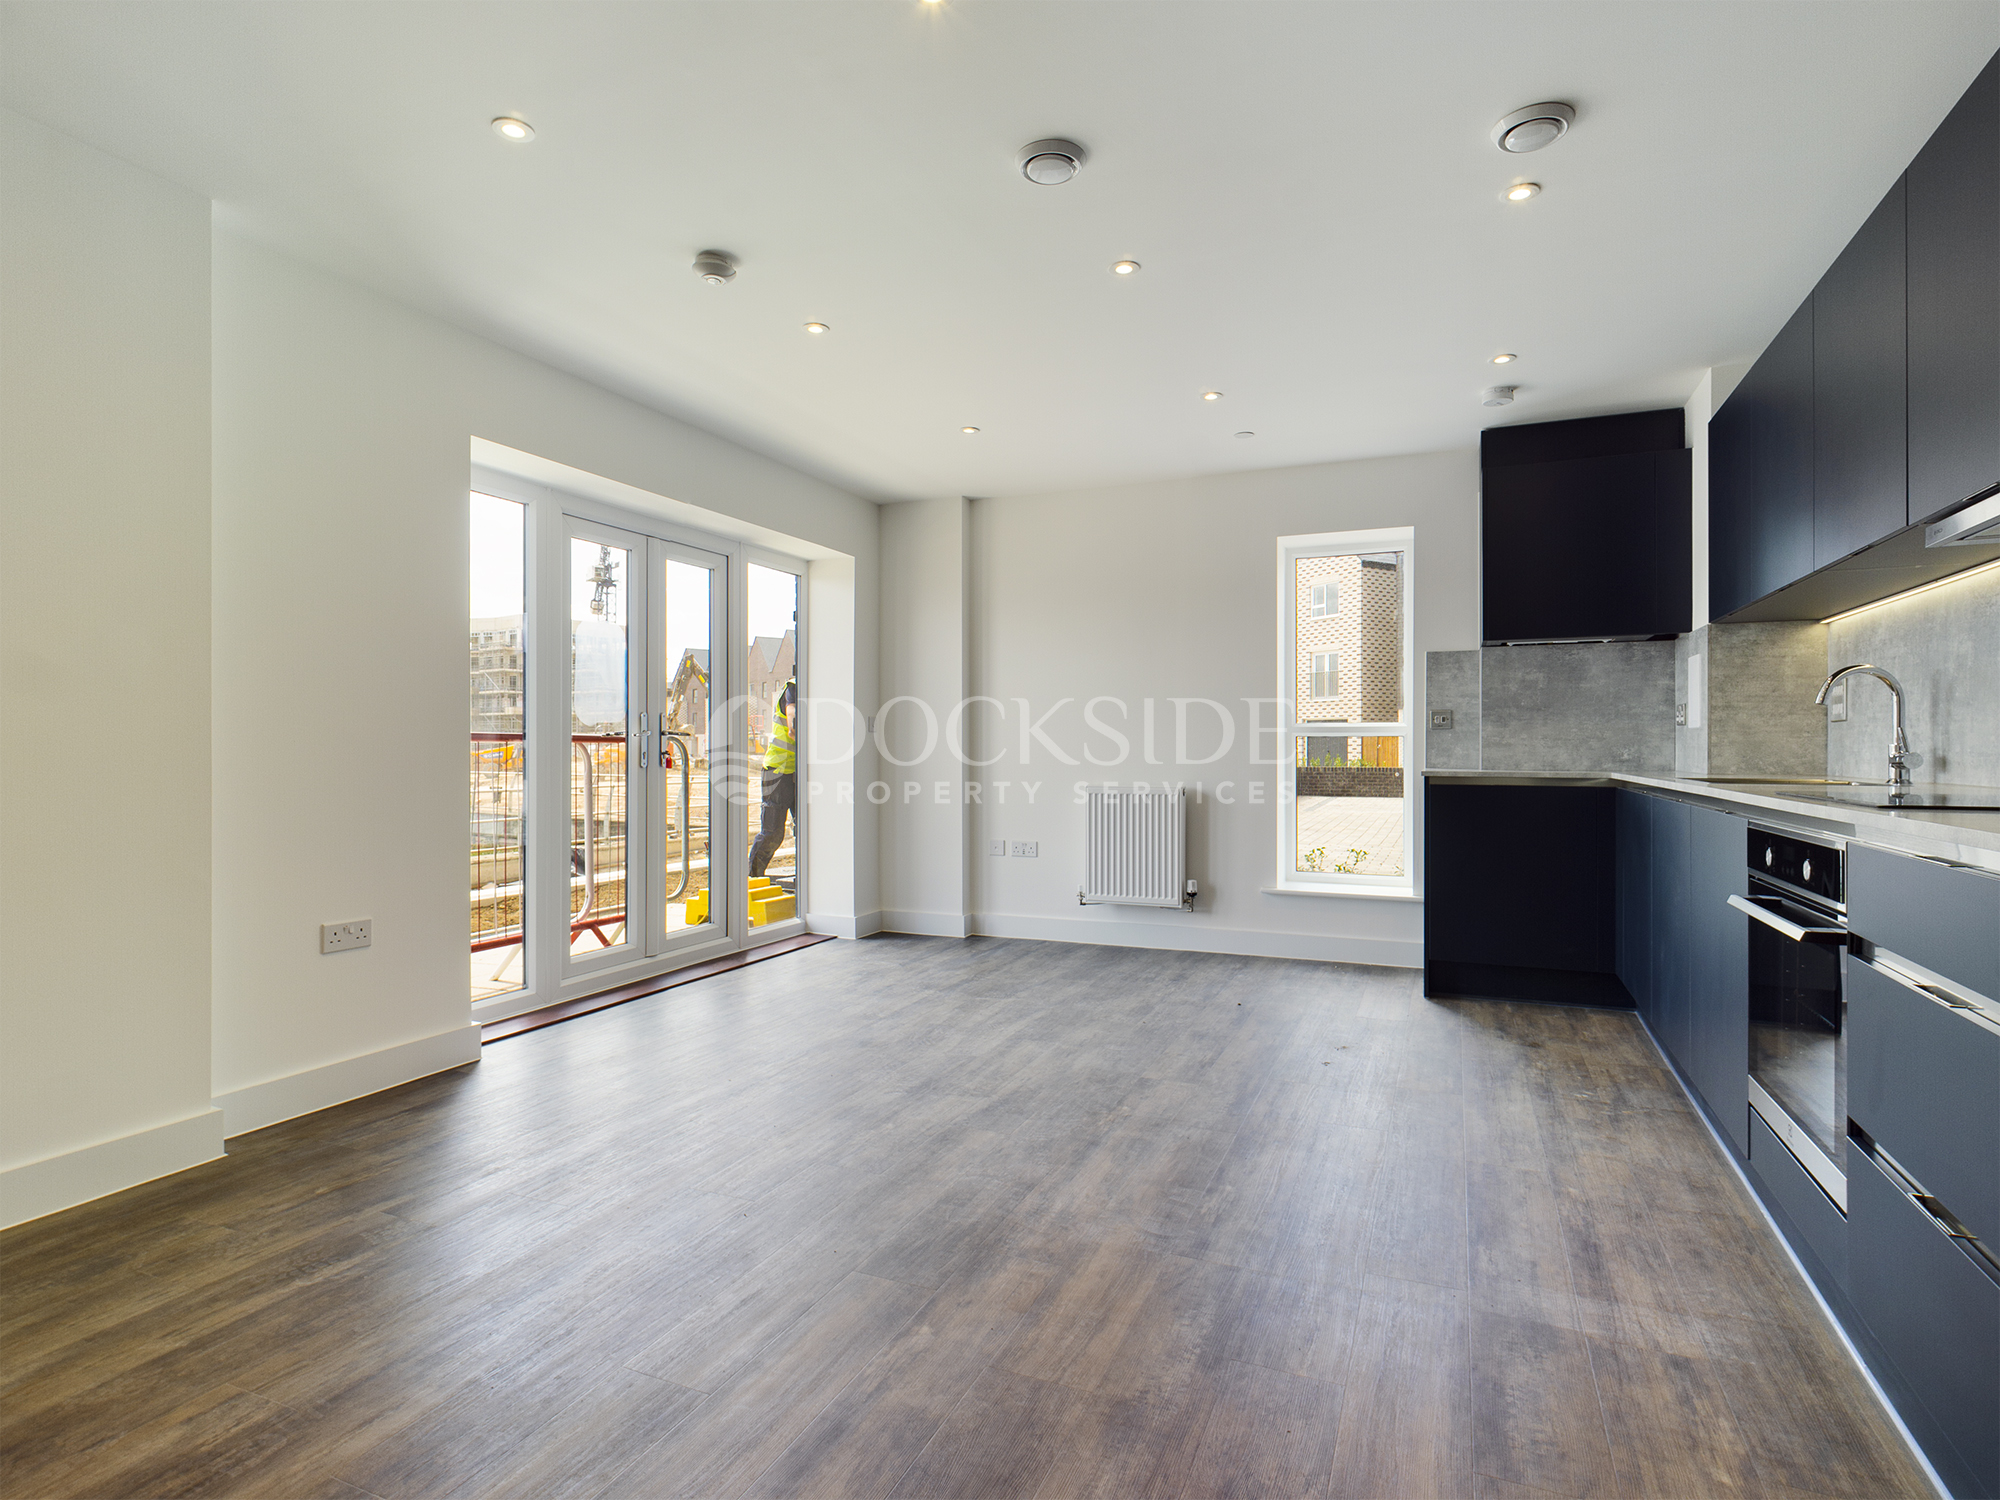 2 bed to rent in 12 Blueboar Lane , Rochester   - Property Image 1